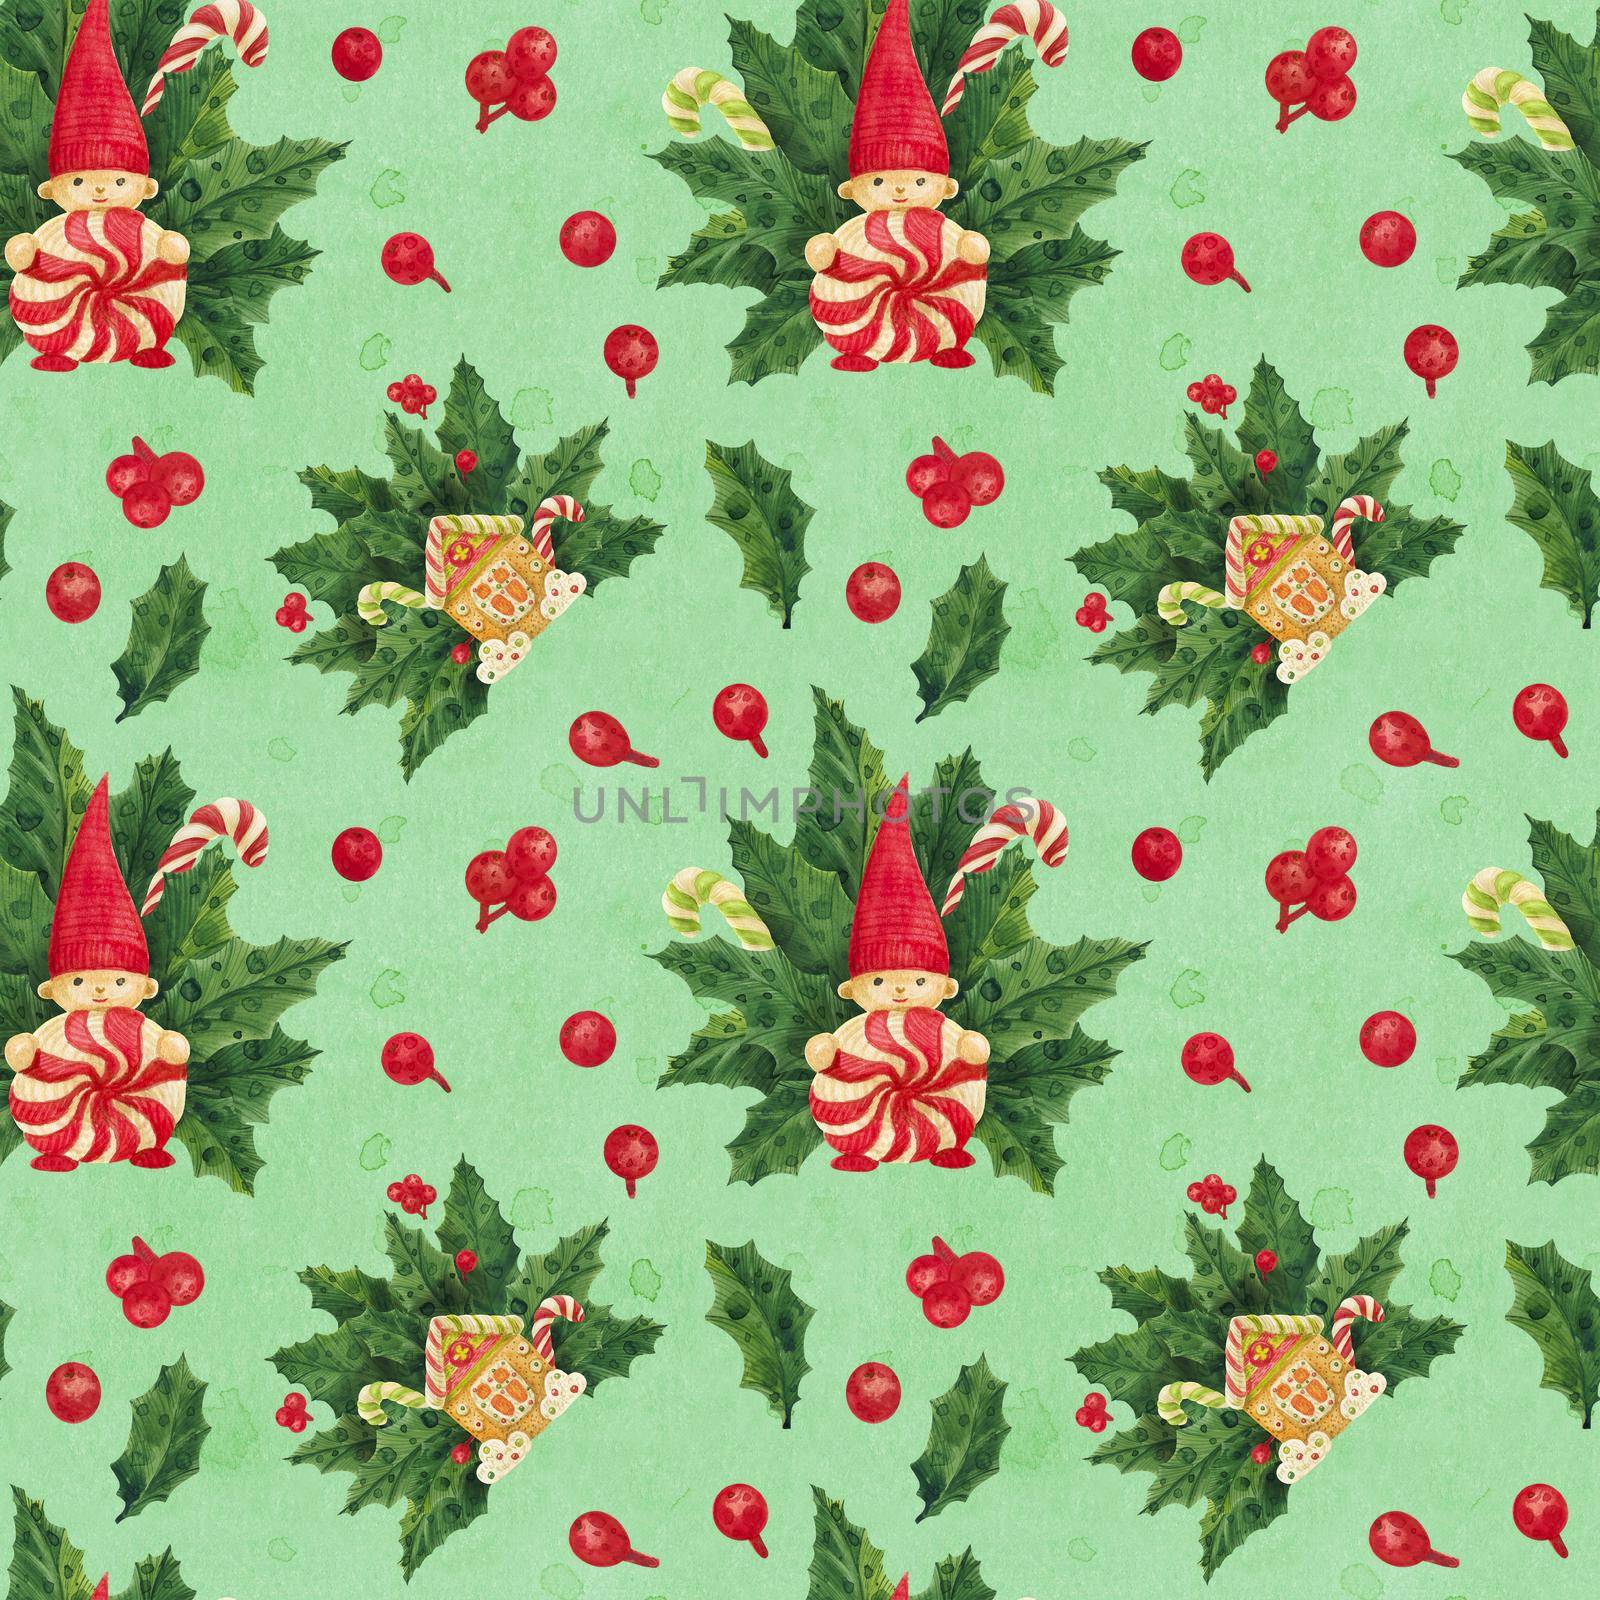 Christmas Holly green pattern with gnome and gingerbread house and candy canes by Xeniasnowstorm